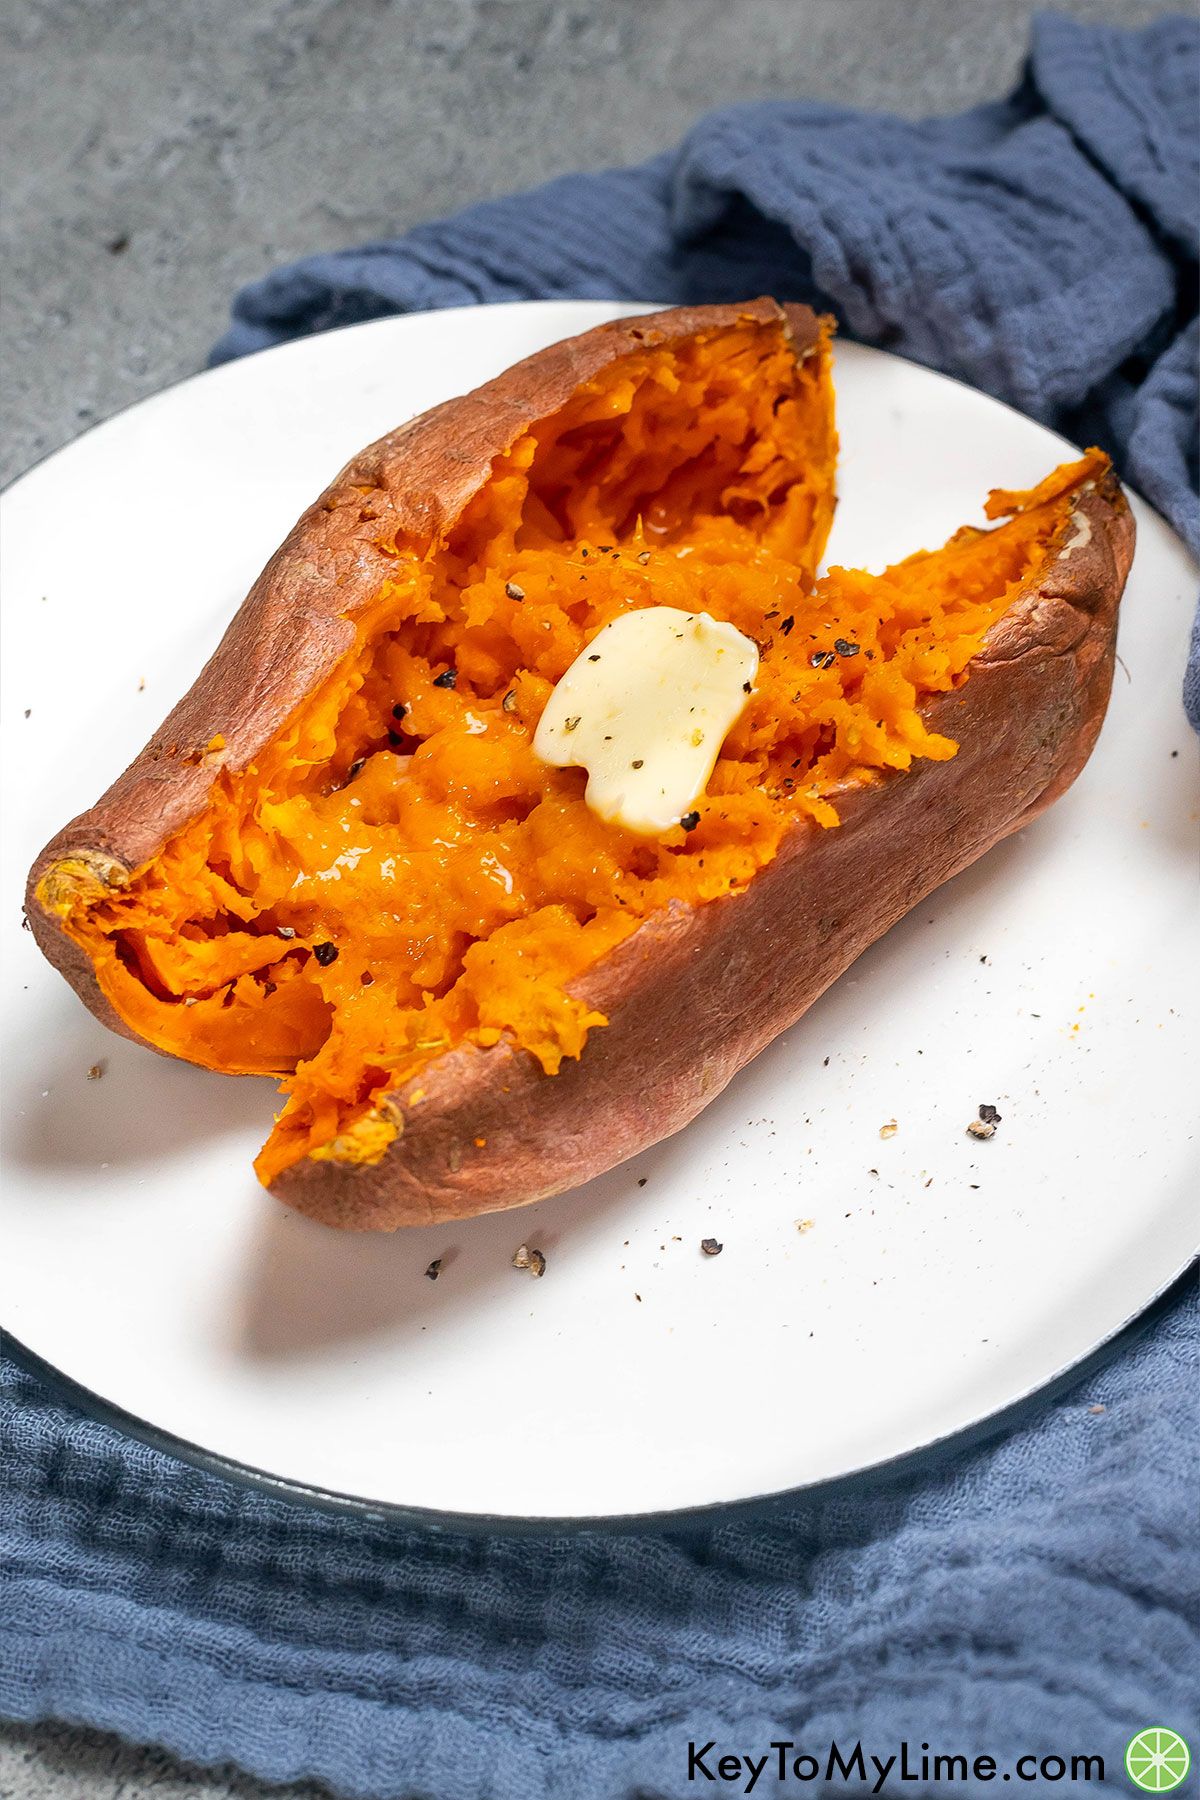 A fully microwaved sweet potato garnished with butter served on a plate.